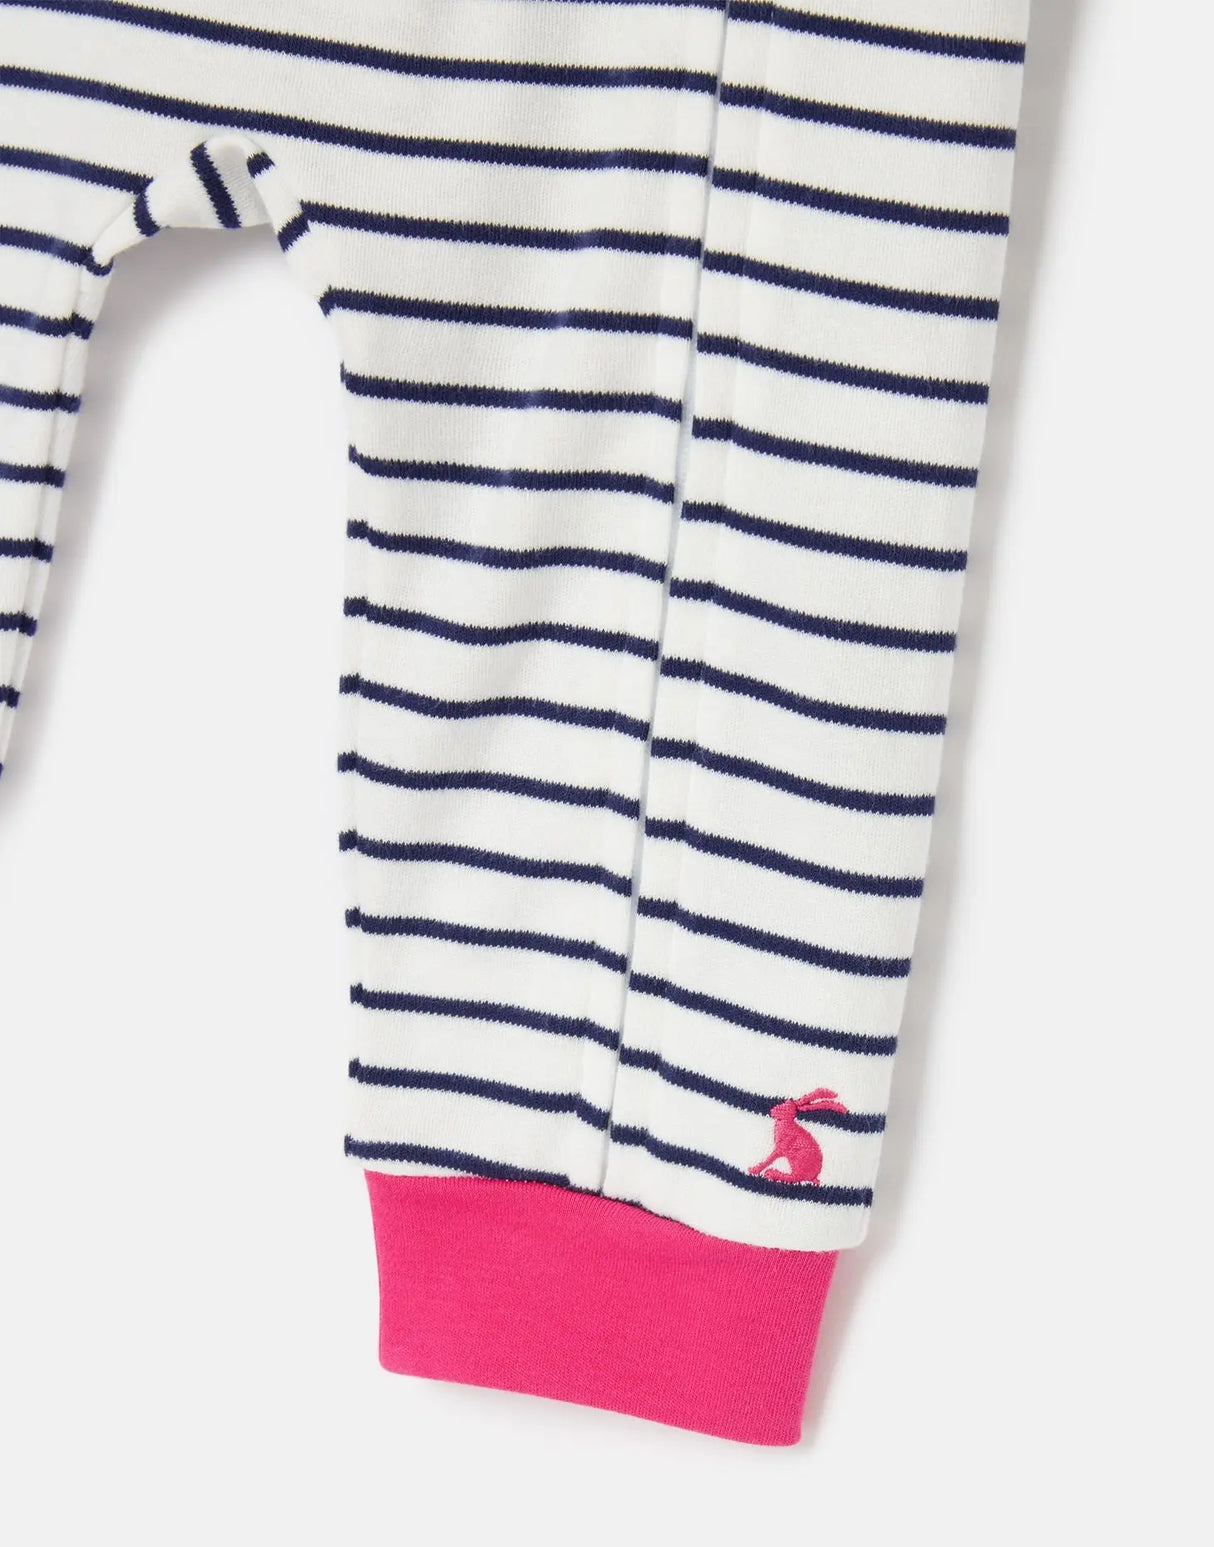 Winfield Organically Grown Cotton Artwork Romper - Stripe | Joules - Joules